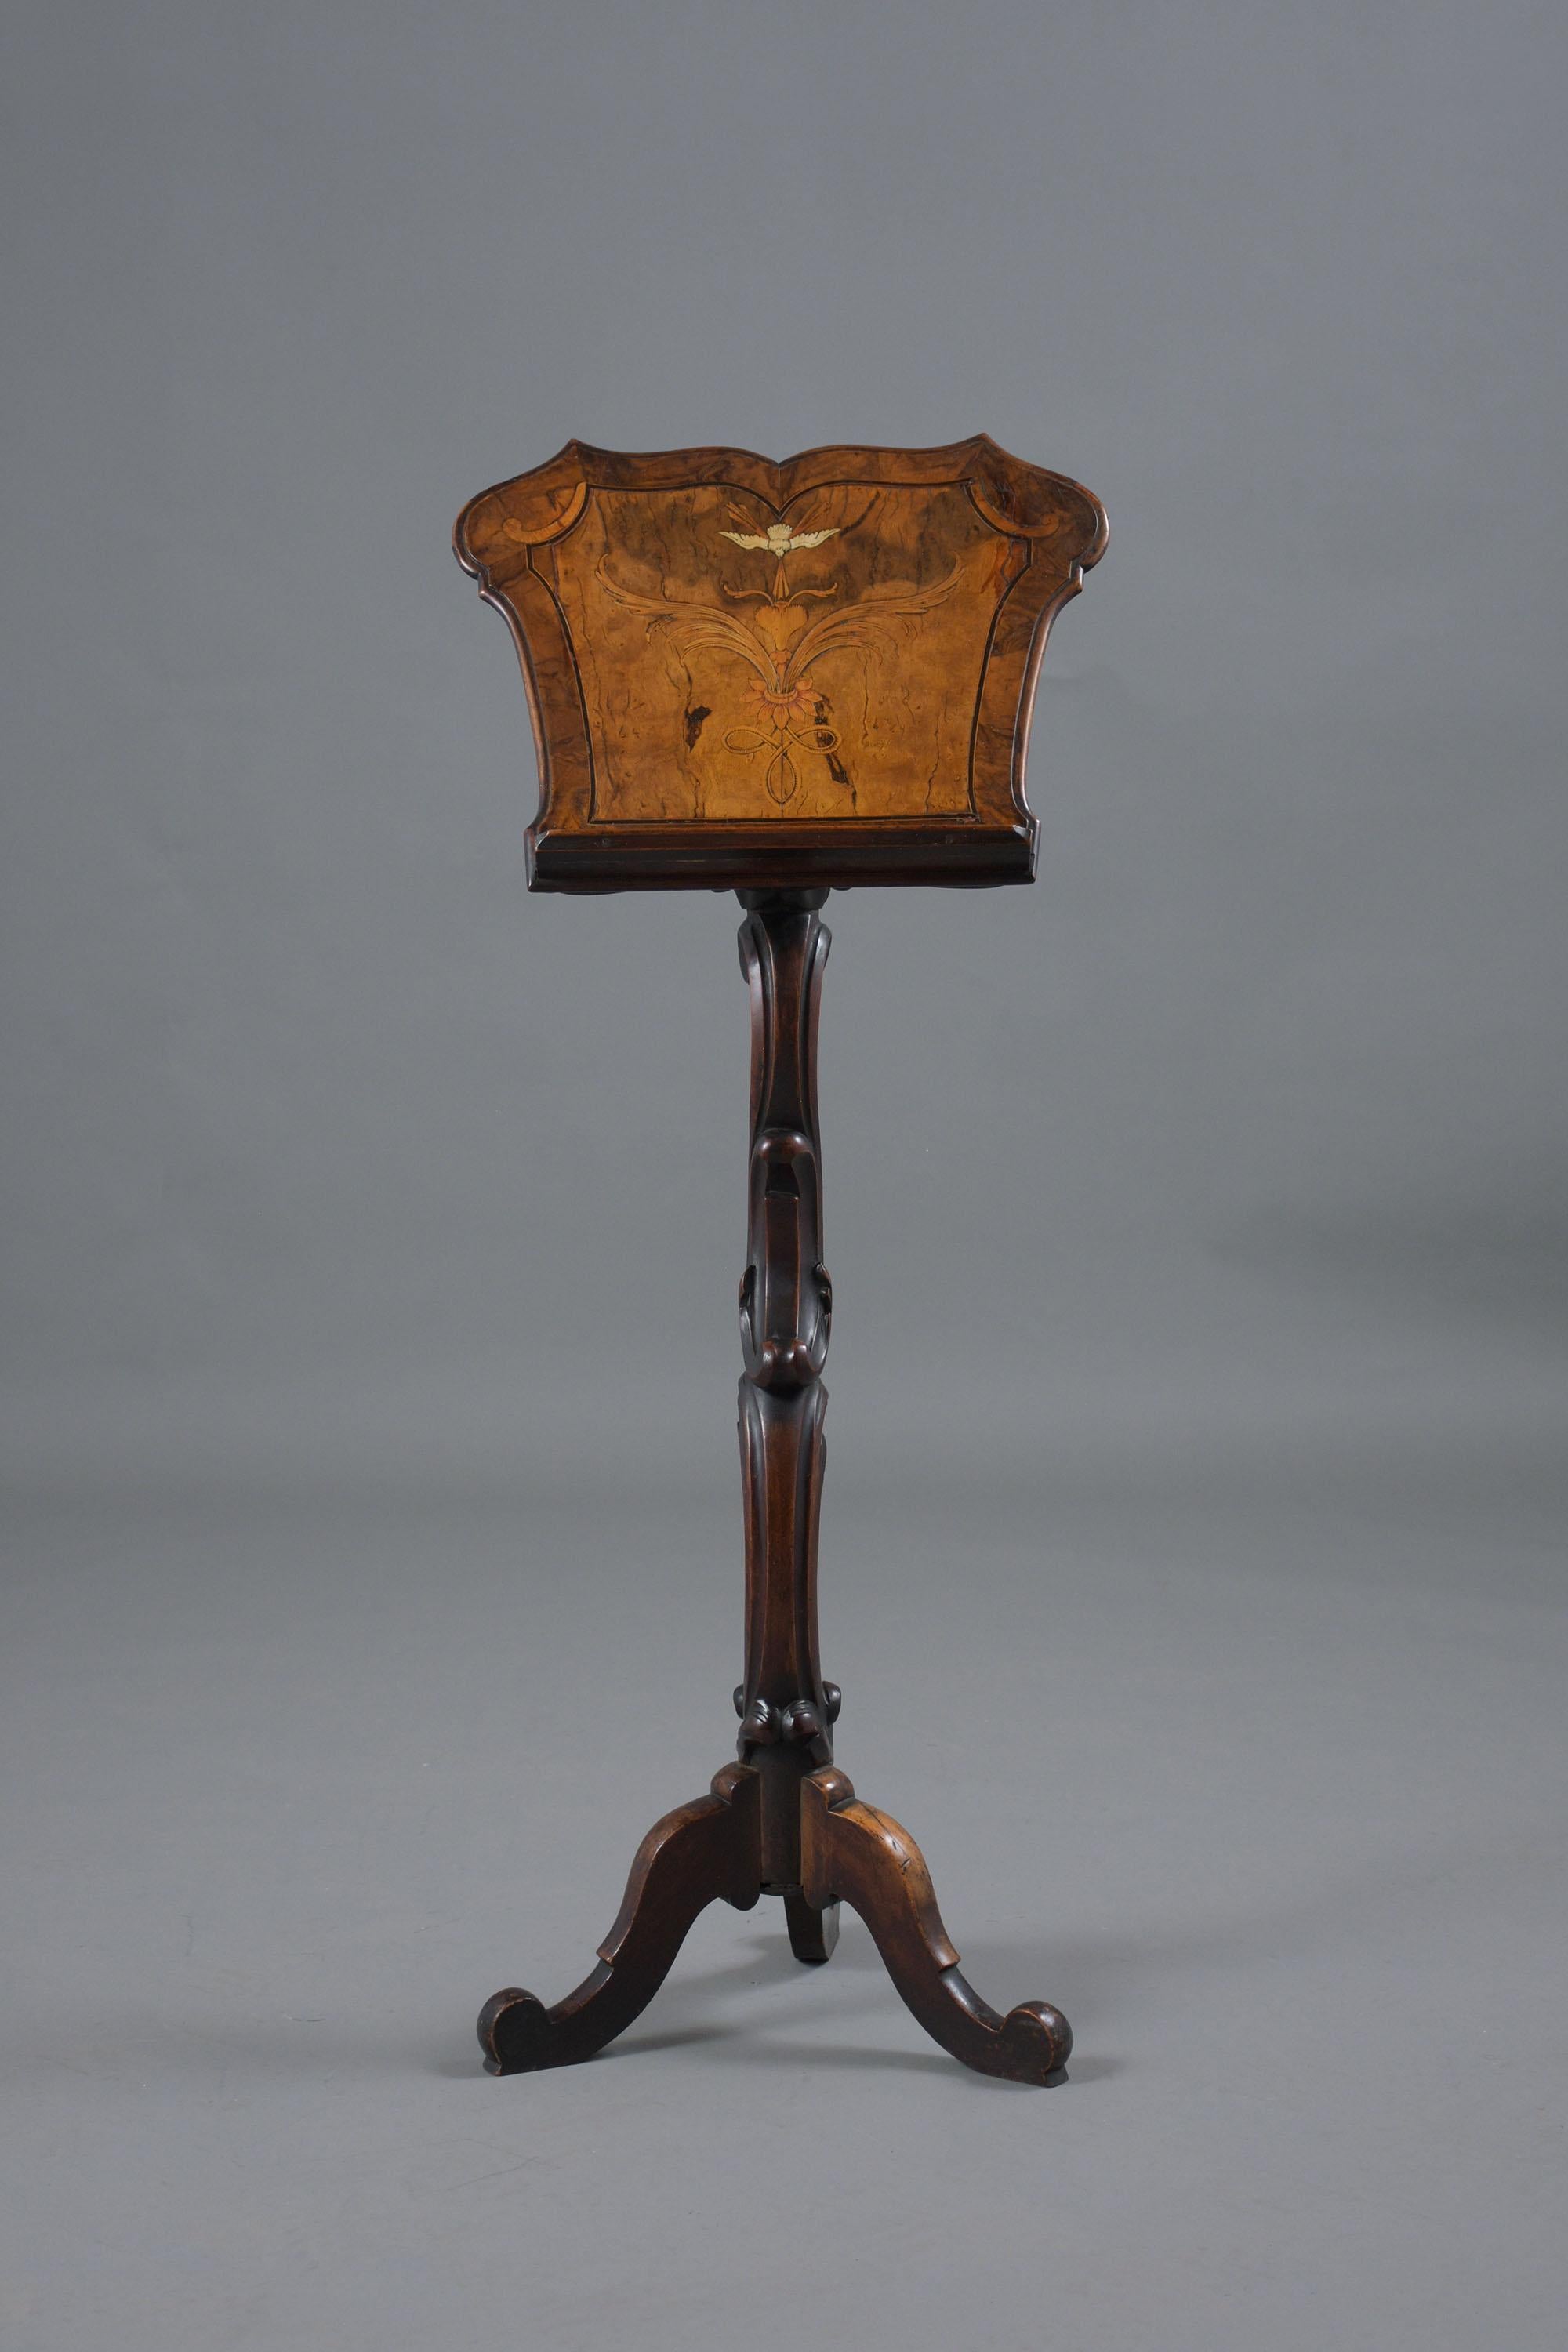 An extraordinary 19th Century Carved Music Stand hand-crafted out of wood in great condition has been professionally restored and has only waxed and polished developing a beautiful patina finish. The music stand features remarkable inlaid details